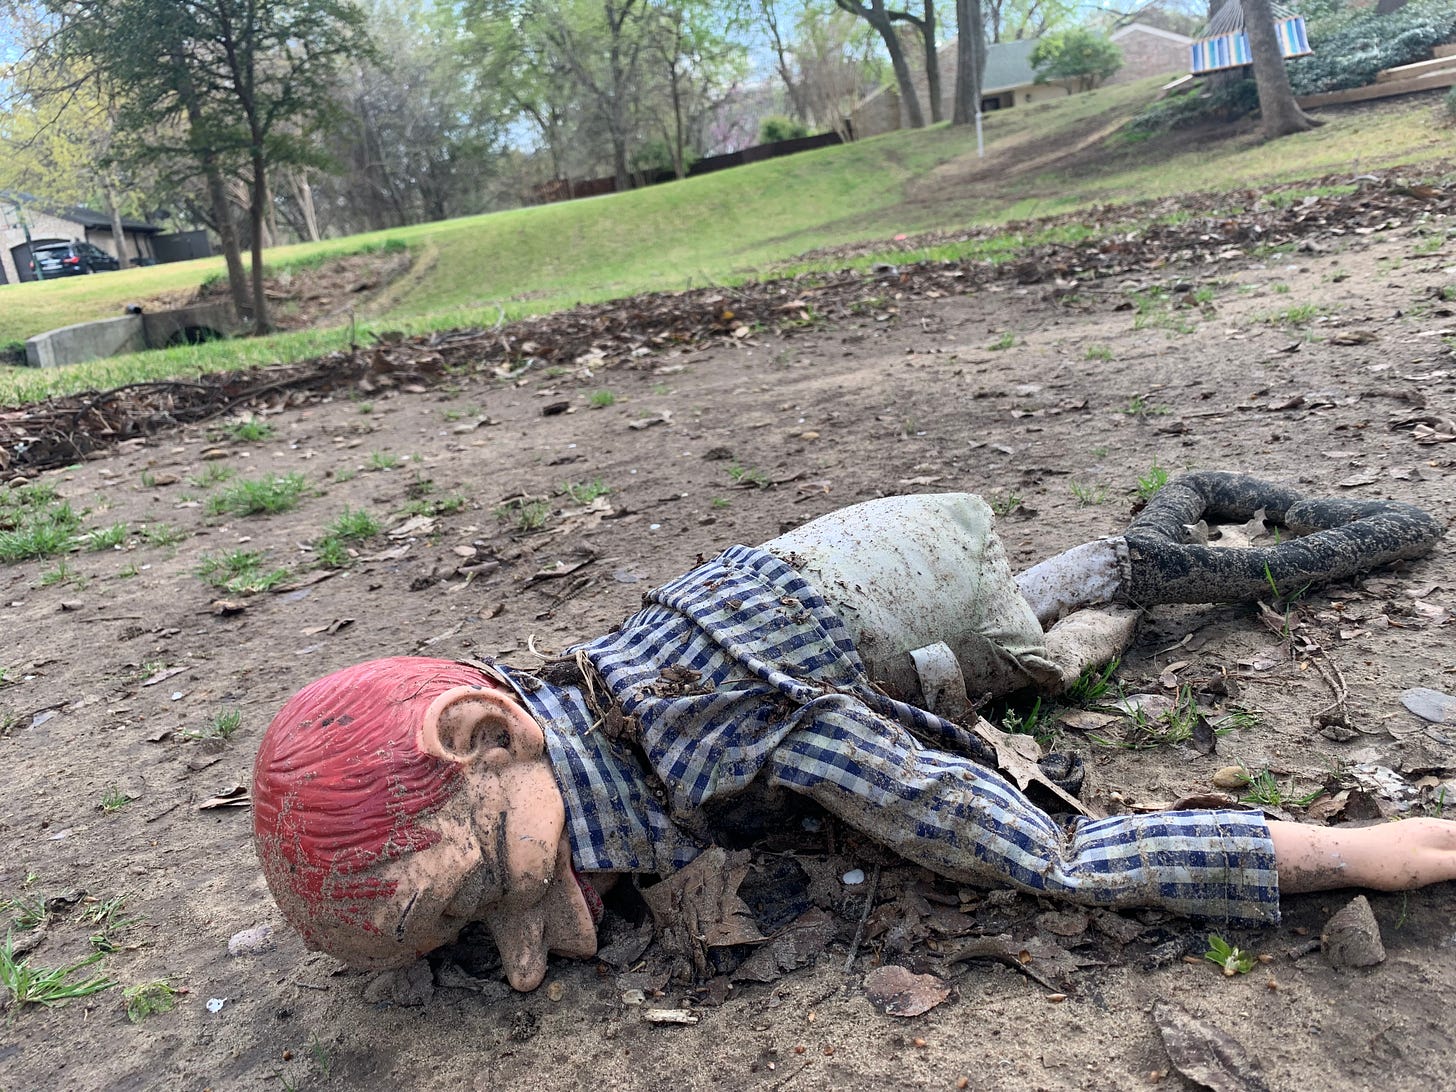 A ventriloquist's dummy laying face down in a creek bed